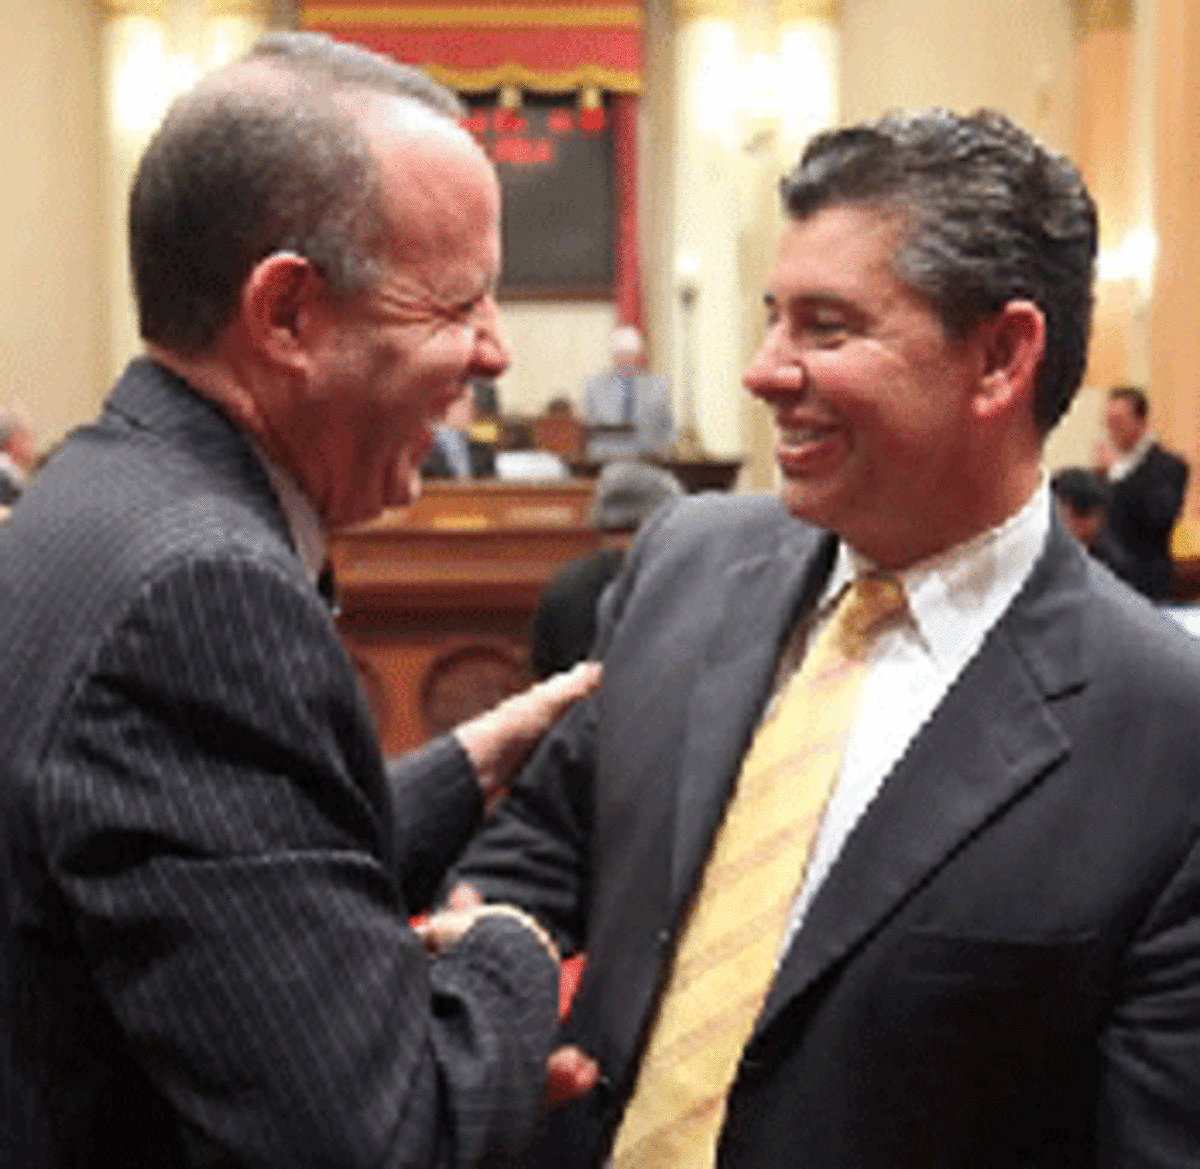 Finished: California's Senate leader, Darrell Steinberg (left), congratulates GOP Sen. Abel Maldonado for casting the vote that ended a three-month budget impasse (Photo credit:  Rich Pedroncelli/AP).